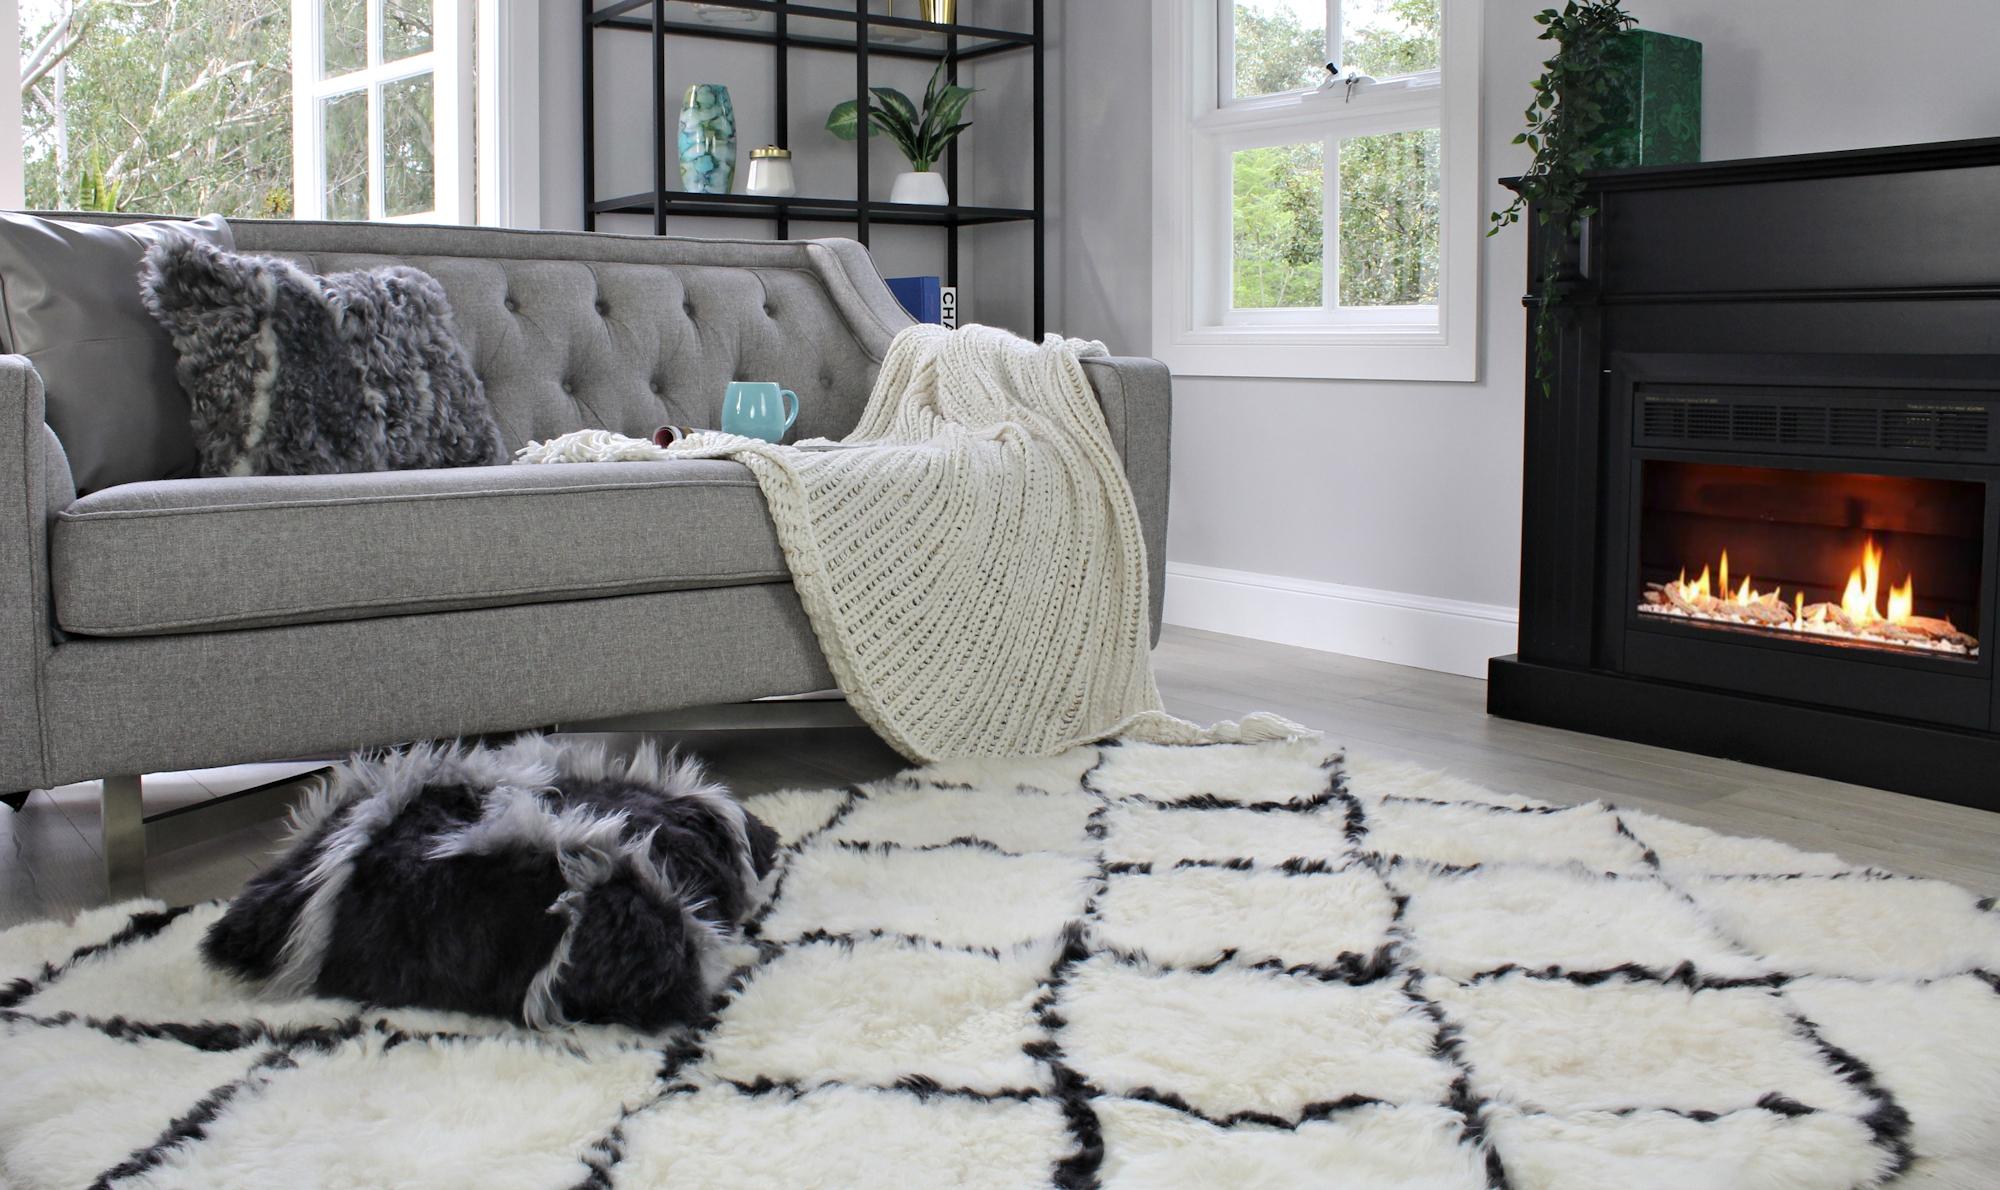 This diamond pattern Patchwork Sheepskin rug is a unique piece custom made by eluxury home. It is meticulously handcrafted by Australian artisans using intricate patchwork detailing with unparalleled sheepskin craftsmanship and made from the finest,